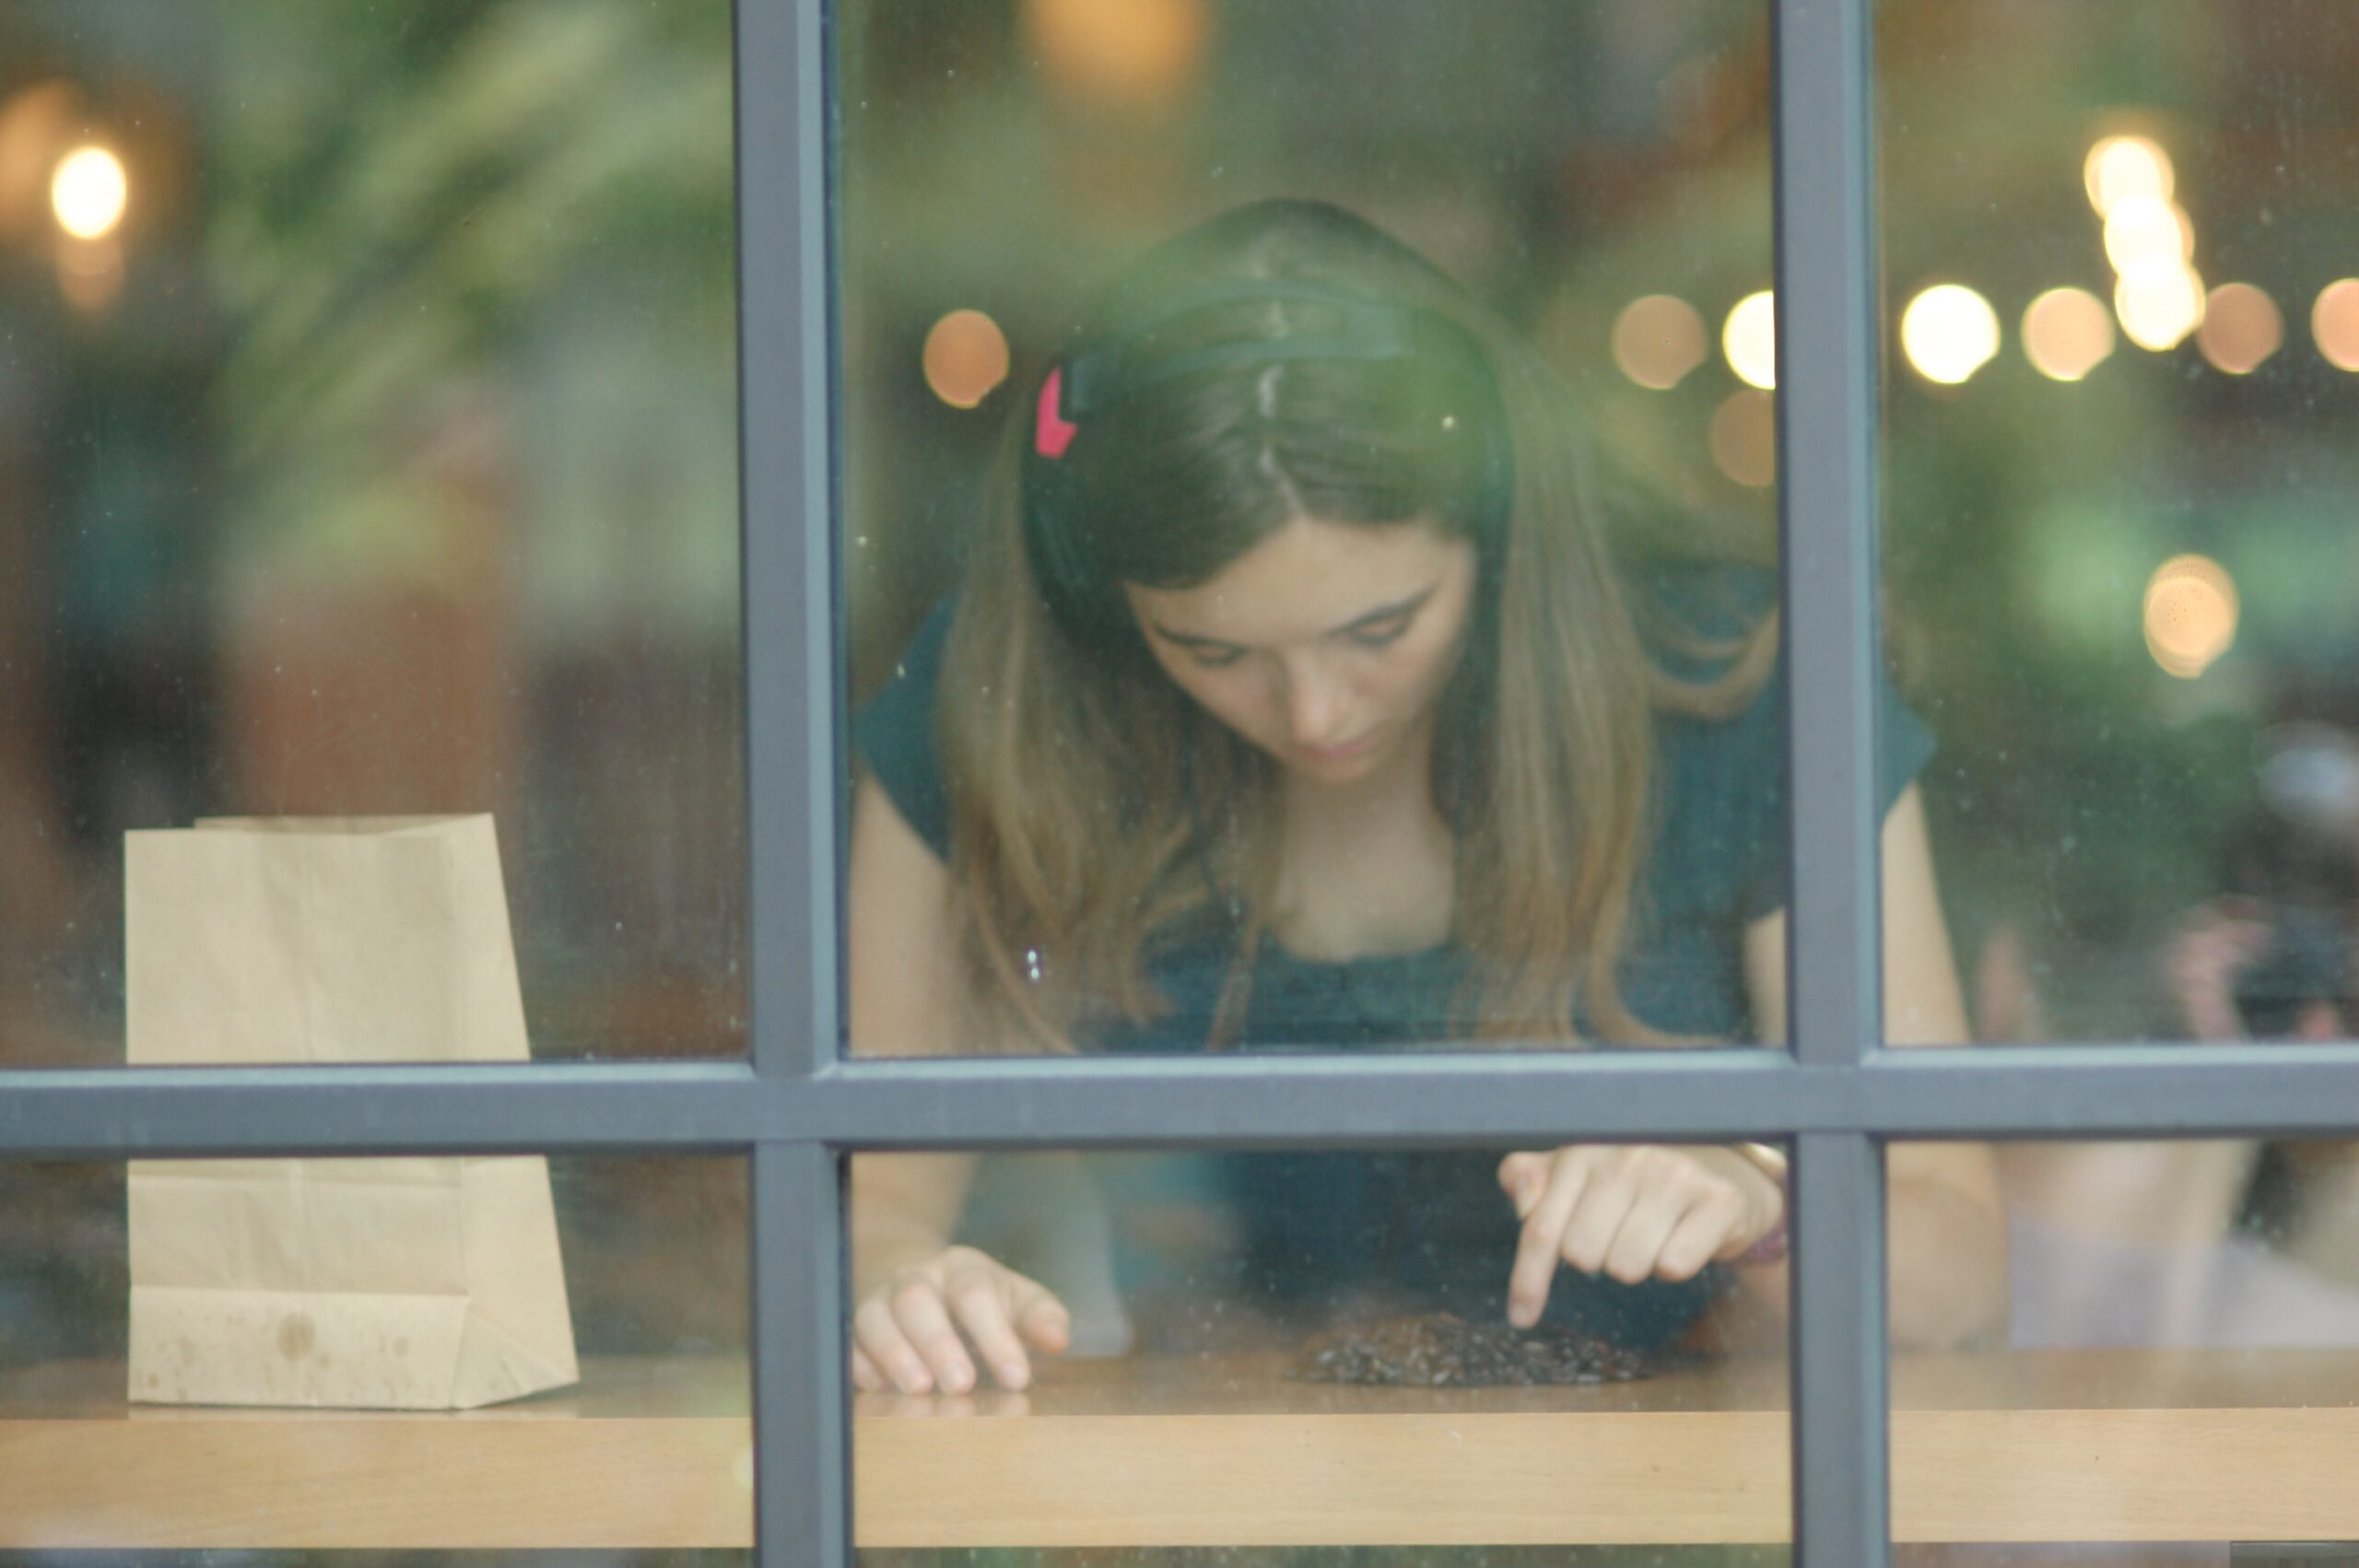 As seen through a window, a person sits at a cafe wearing headphones and counts coffee beans on the table